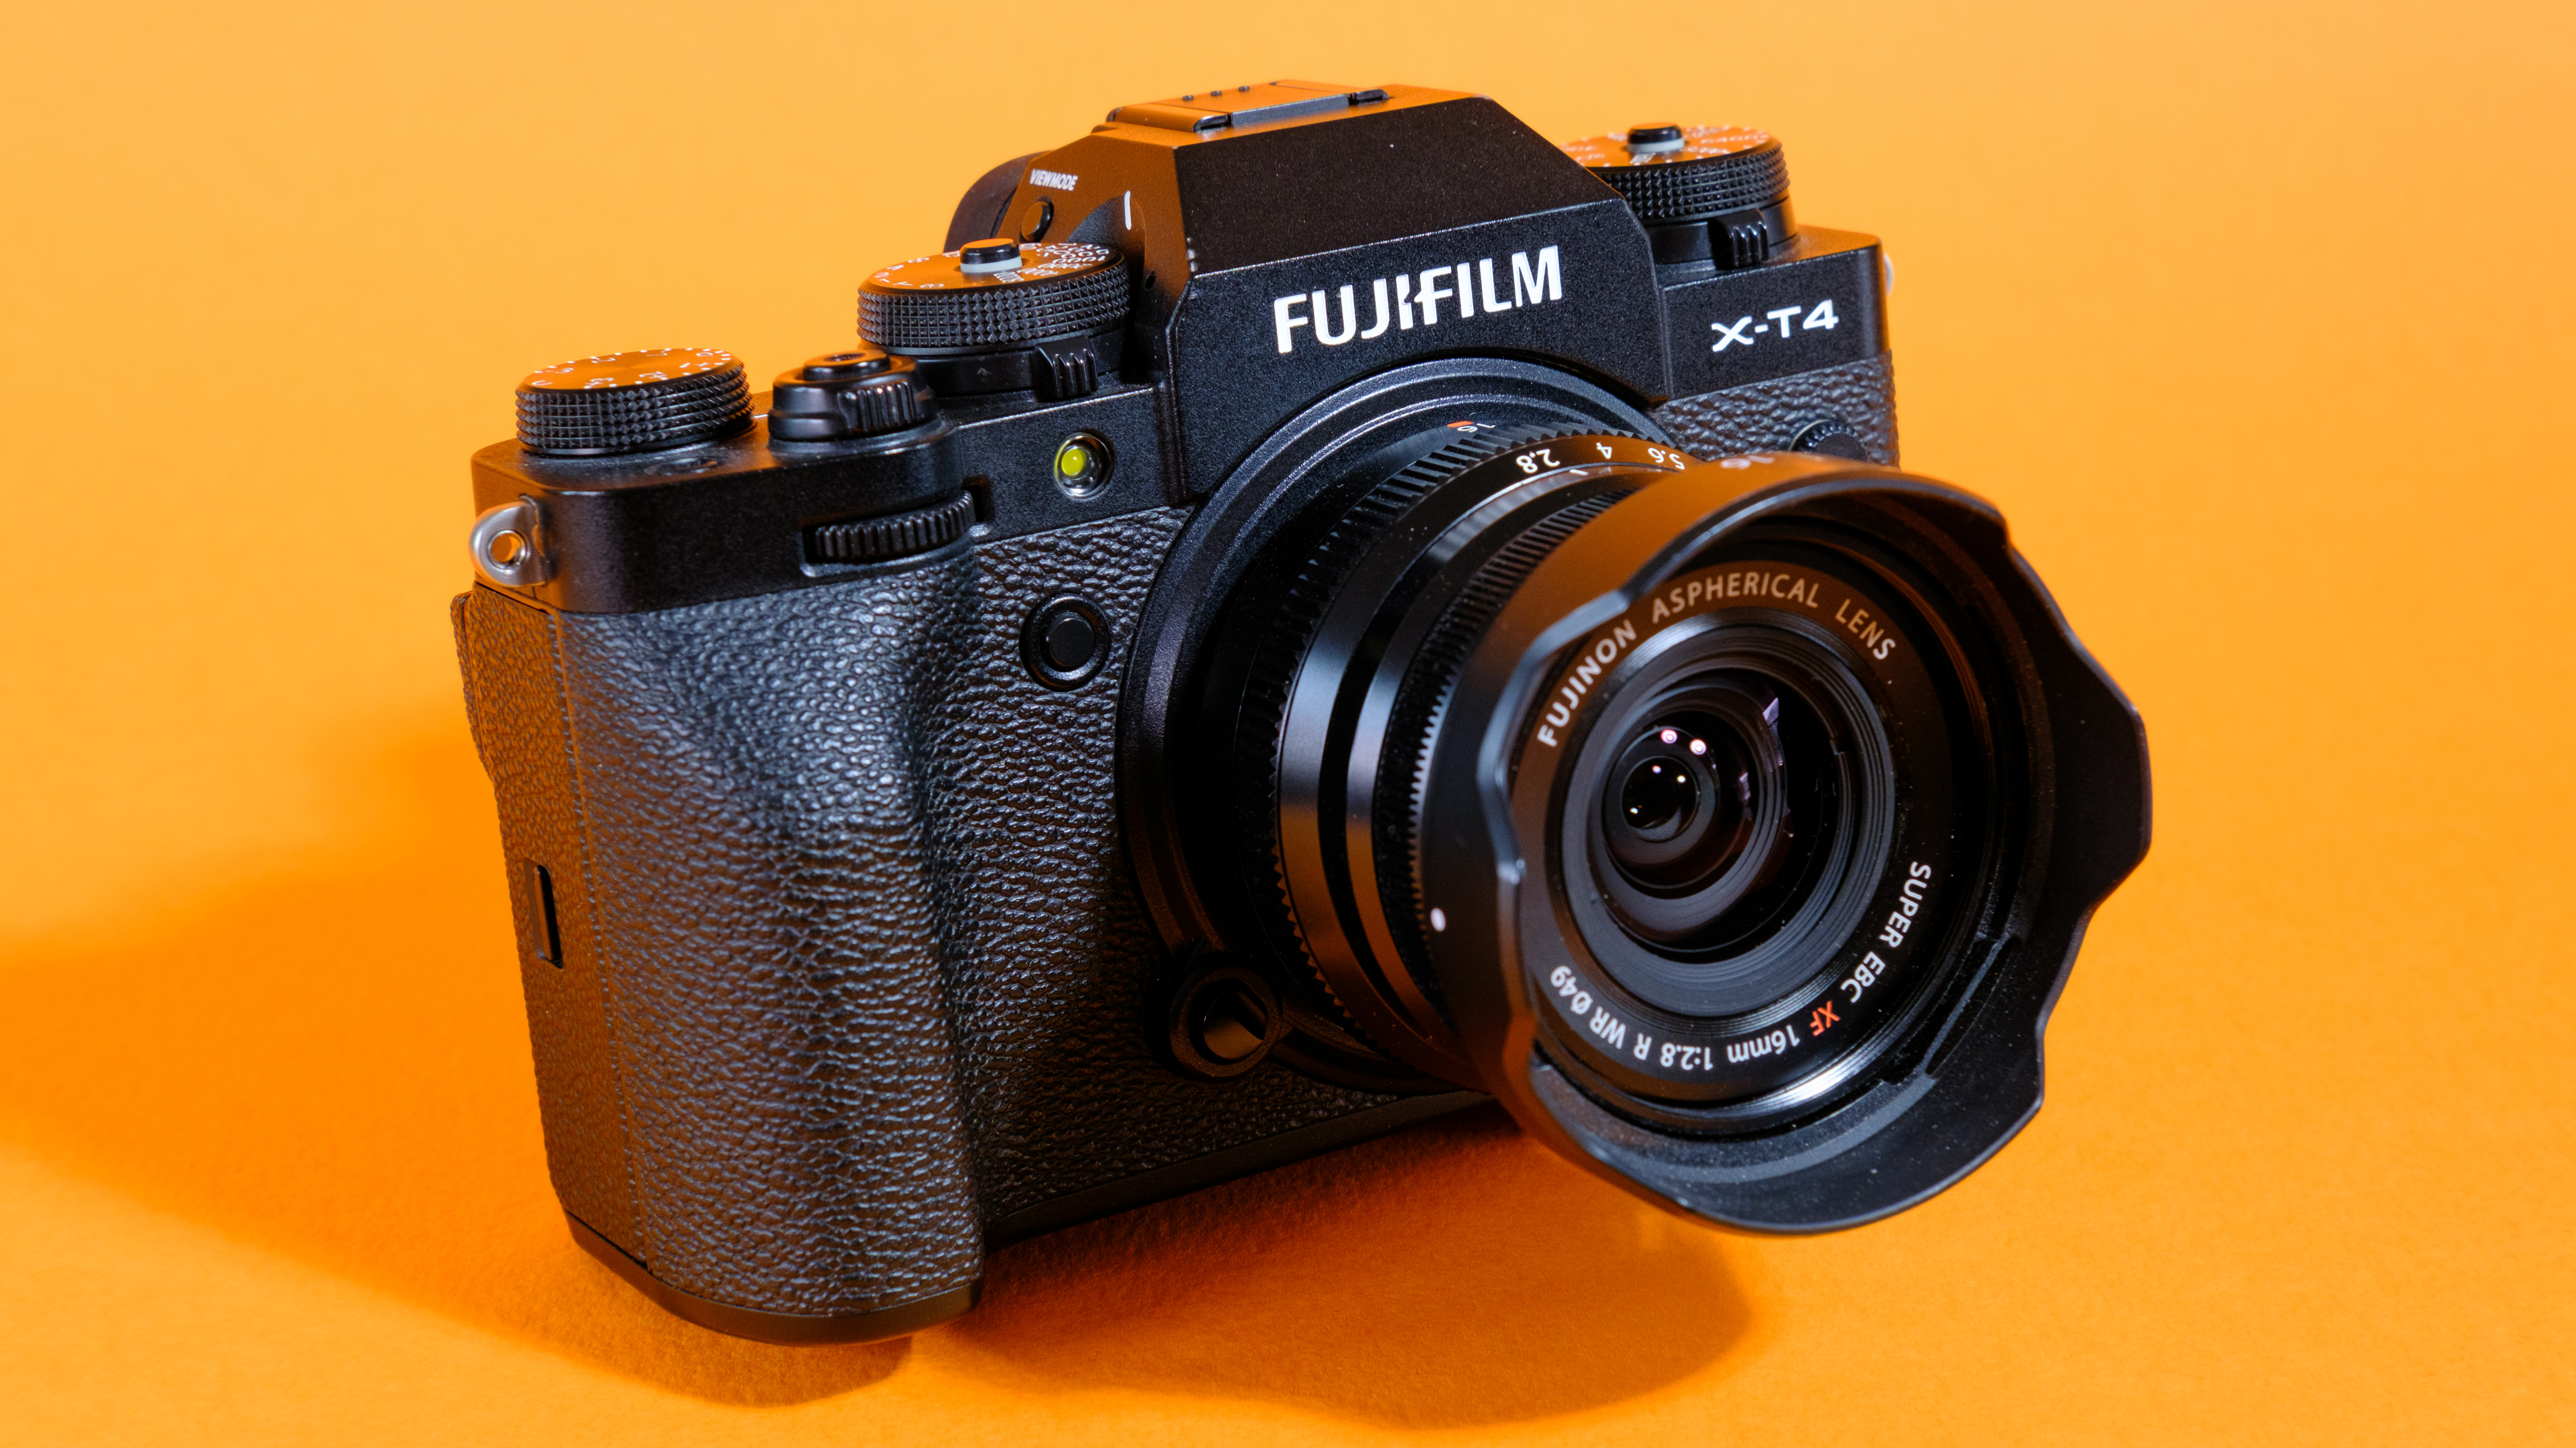 A photo of the Fujifilm X-T4 against an orange background.